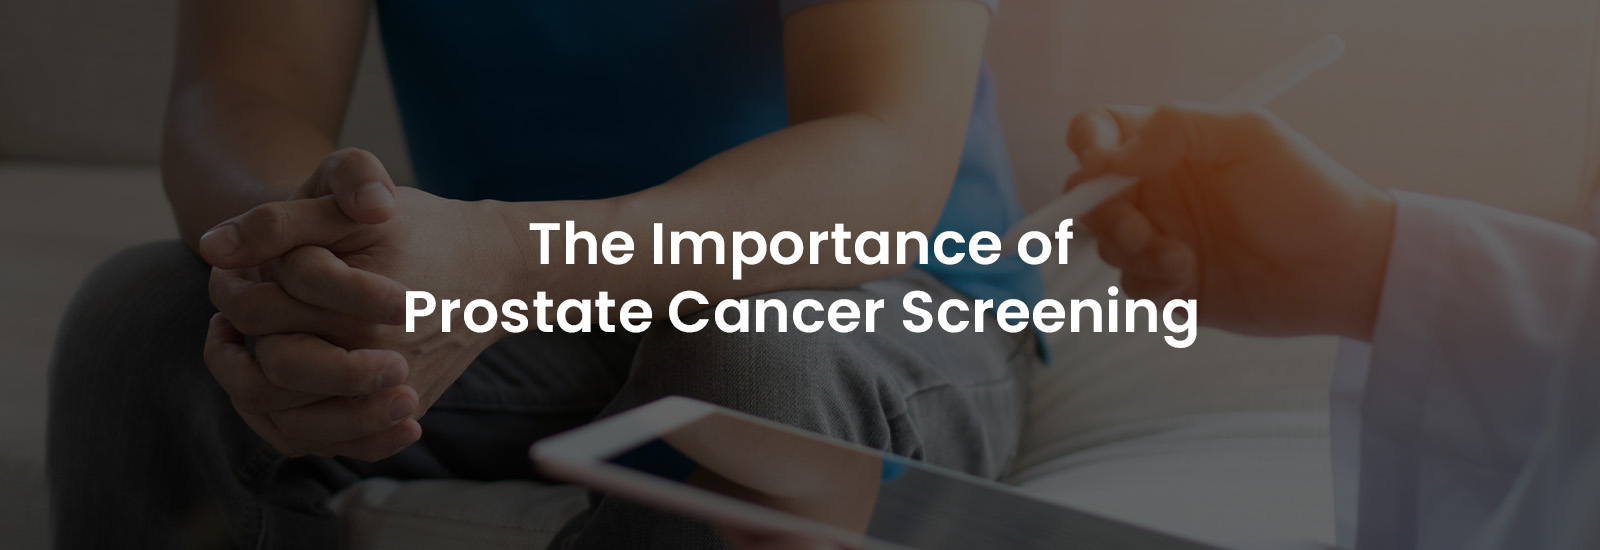 The Importance of Prostate Cancer Screening | Banner Image